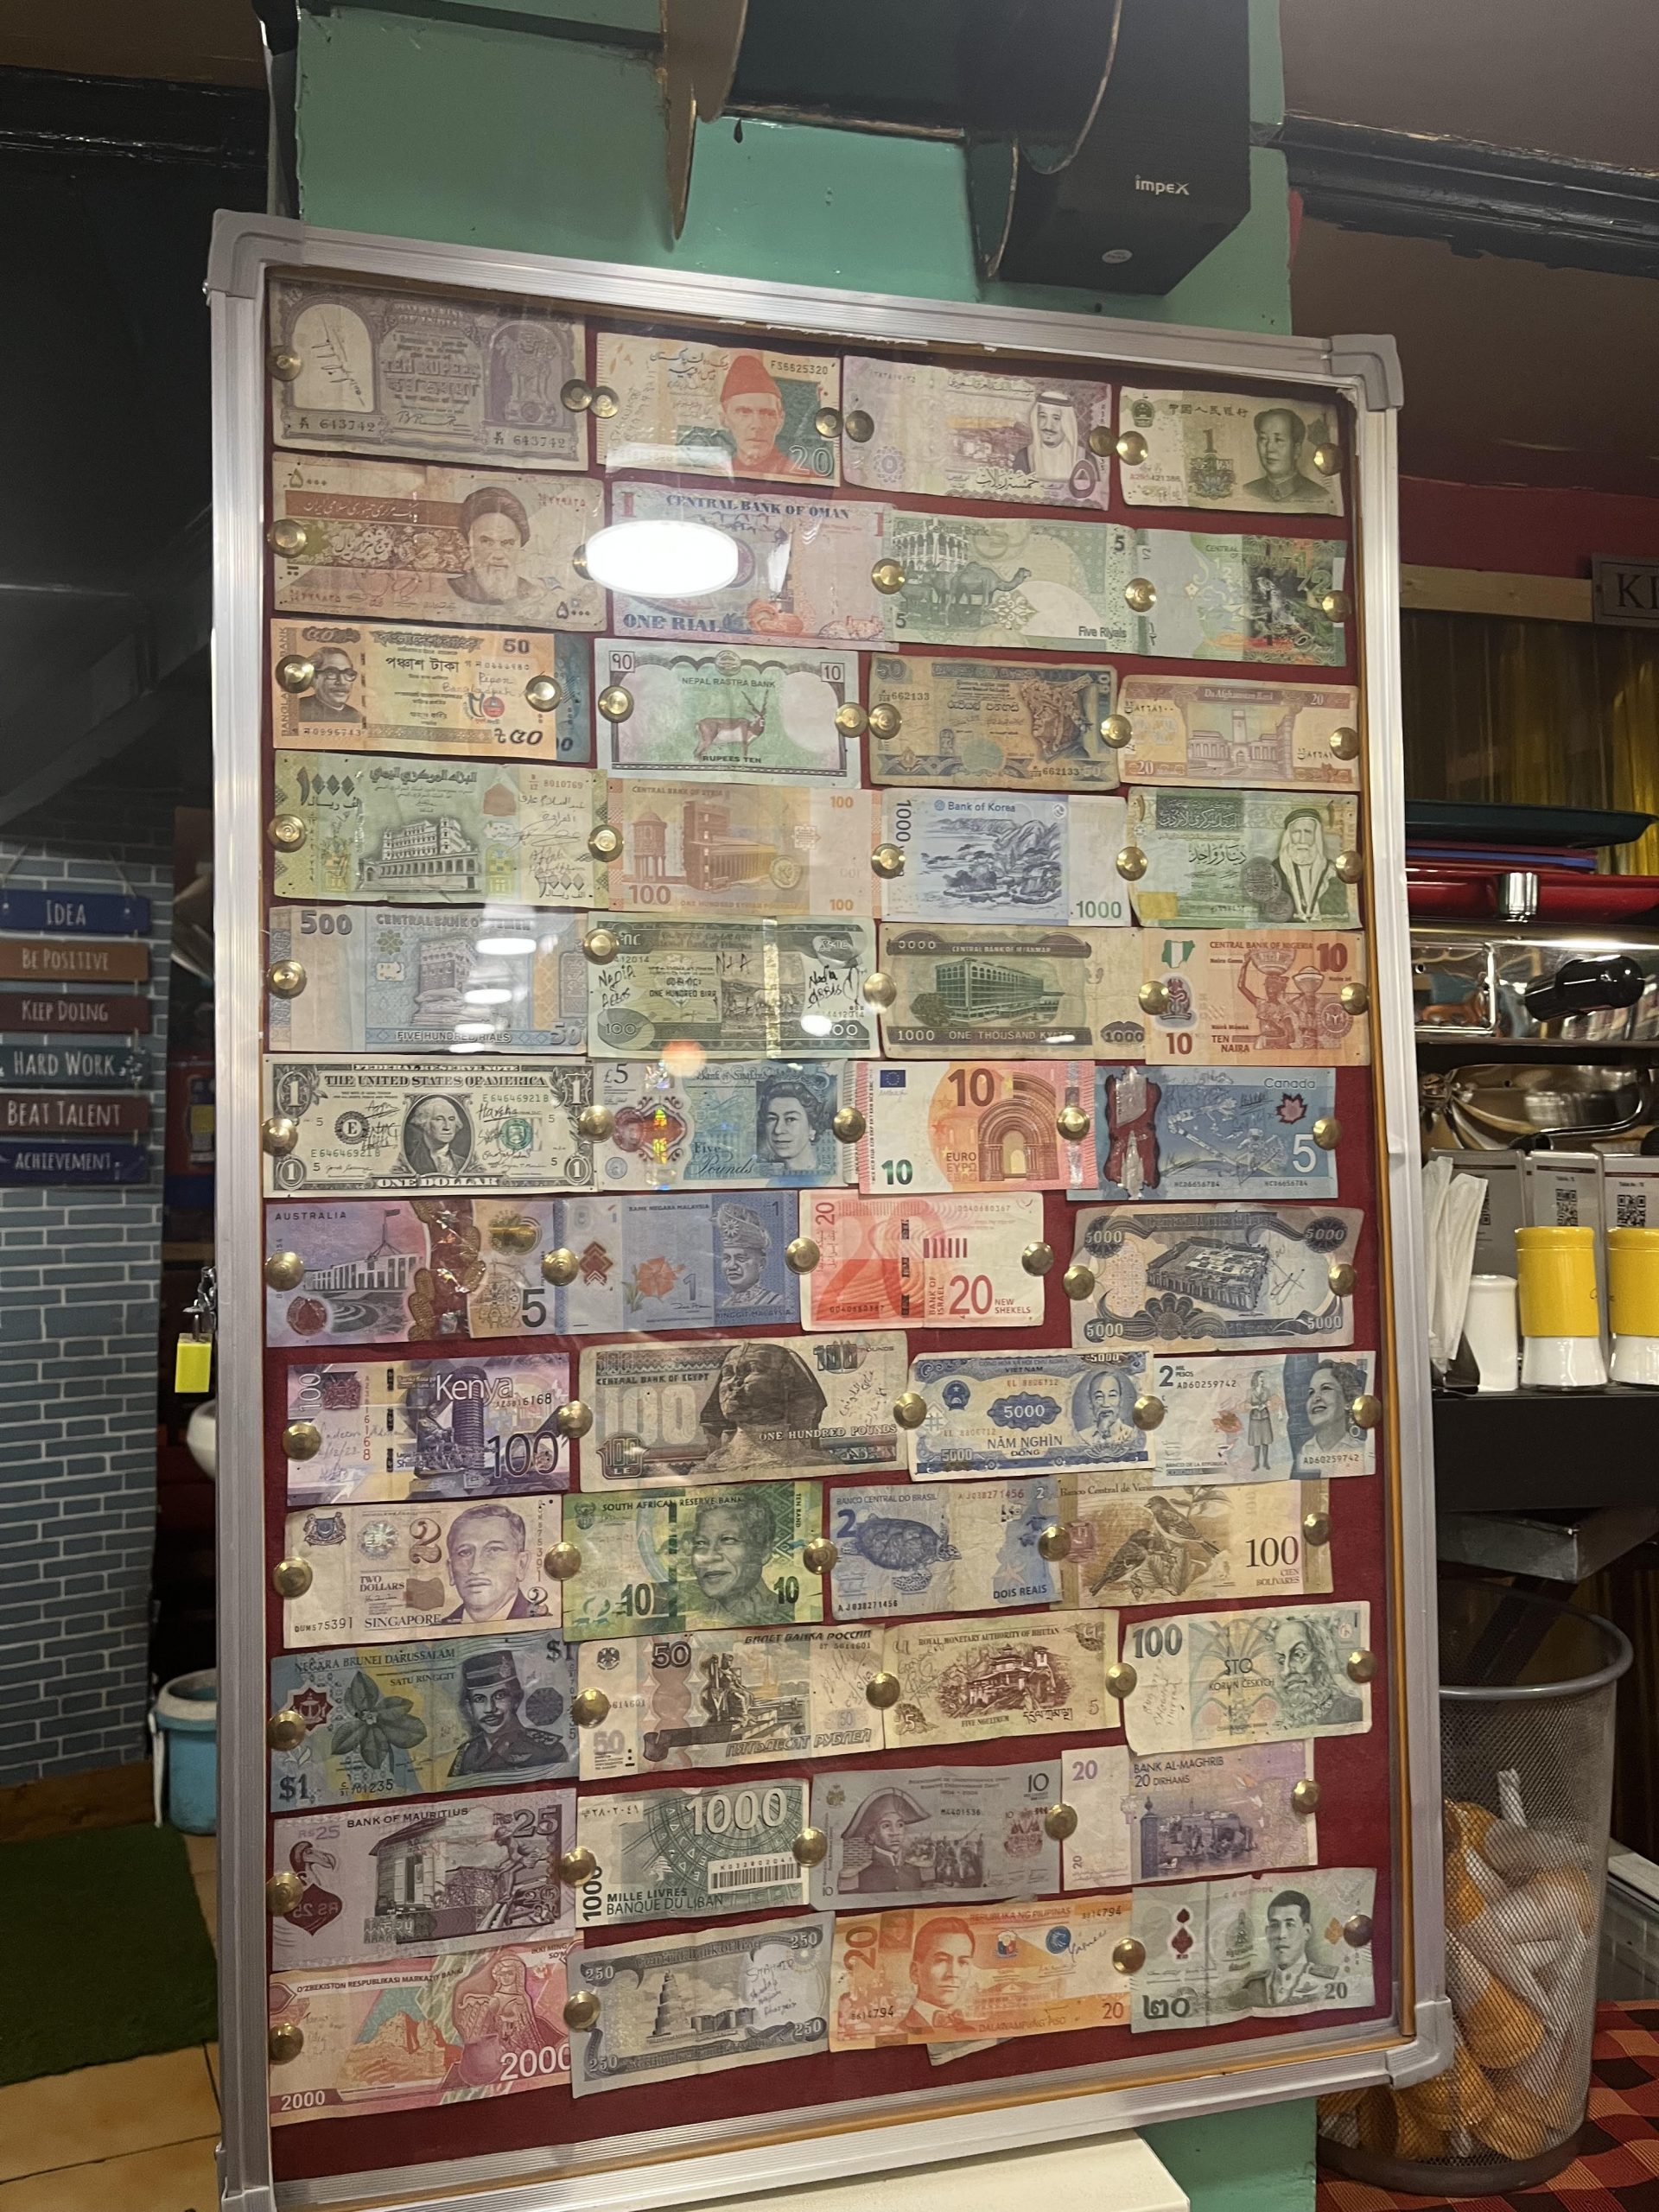 cafe owner's collection of different currencies.